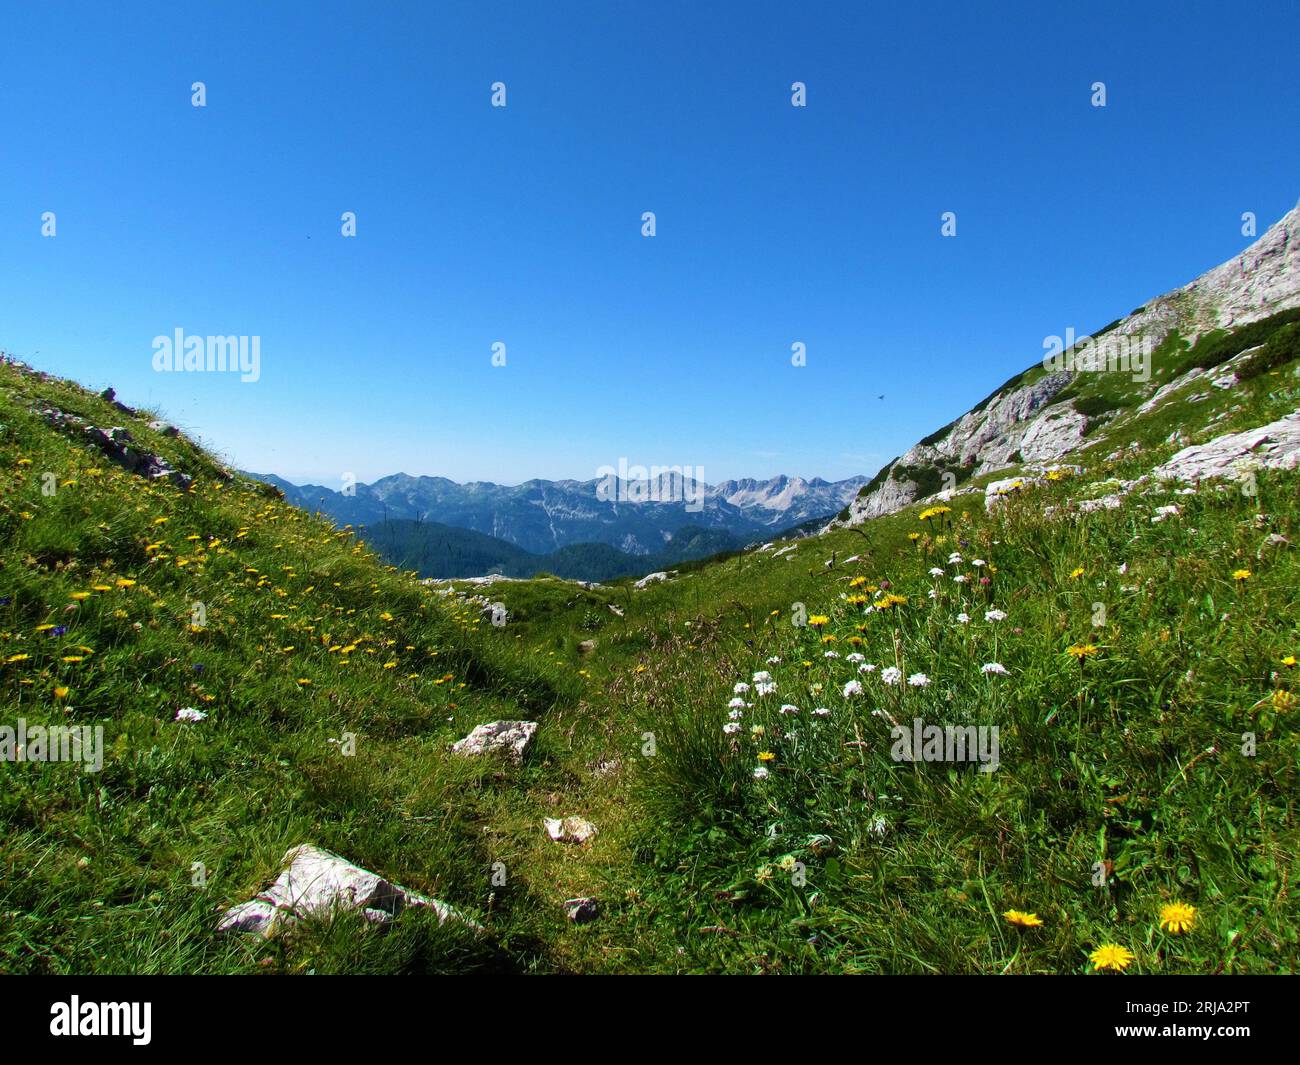 View of a mountain range in Julian alps, Slovenia with a meadow covered in white silvery yarrow (Achillea clavennae) and yellow flowers in front Stock Photo